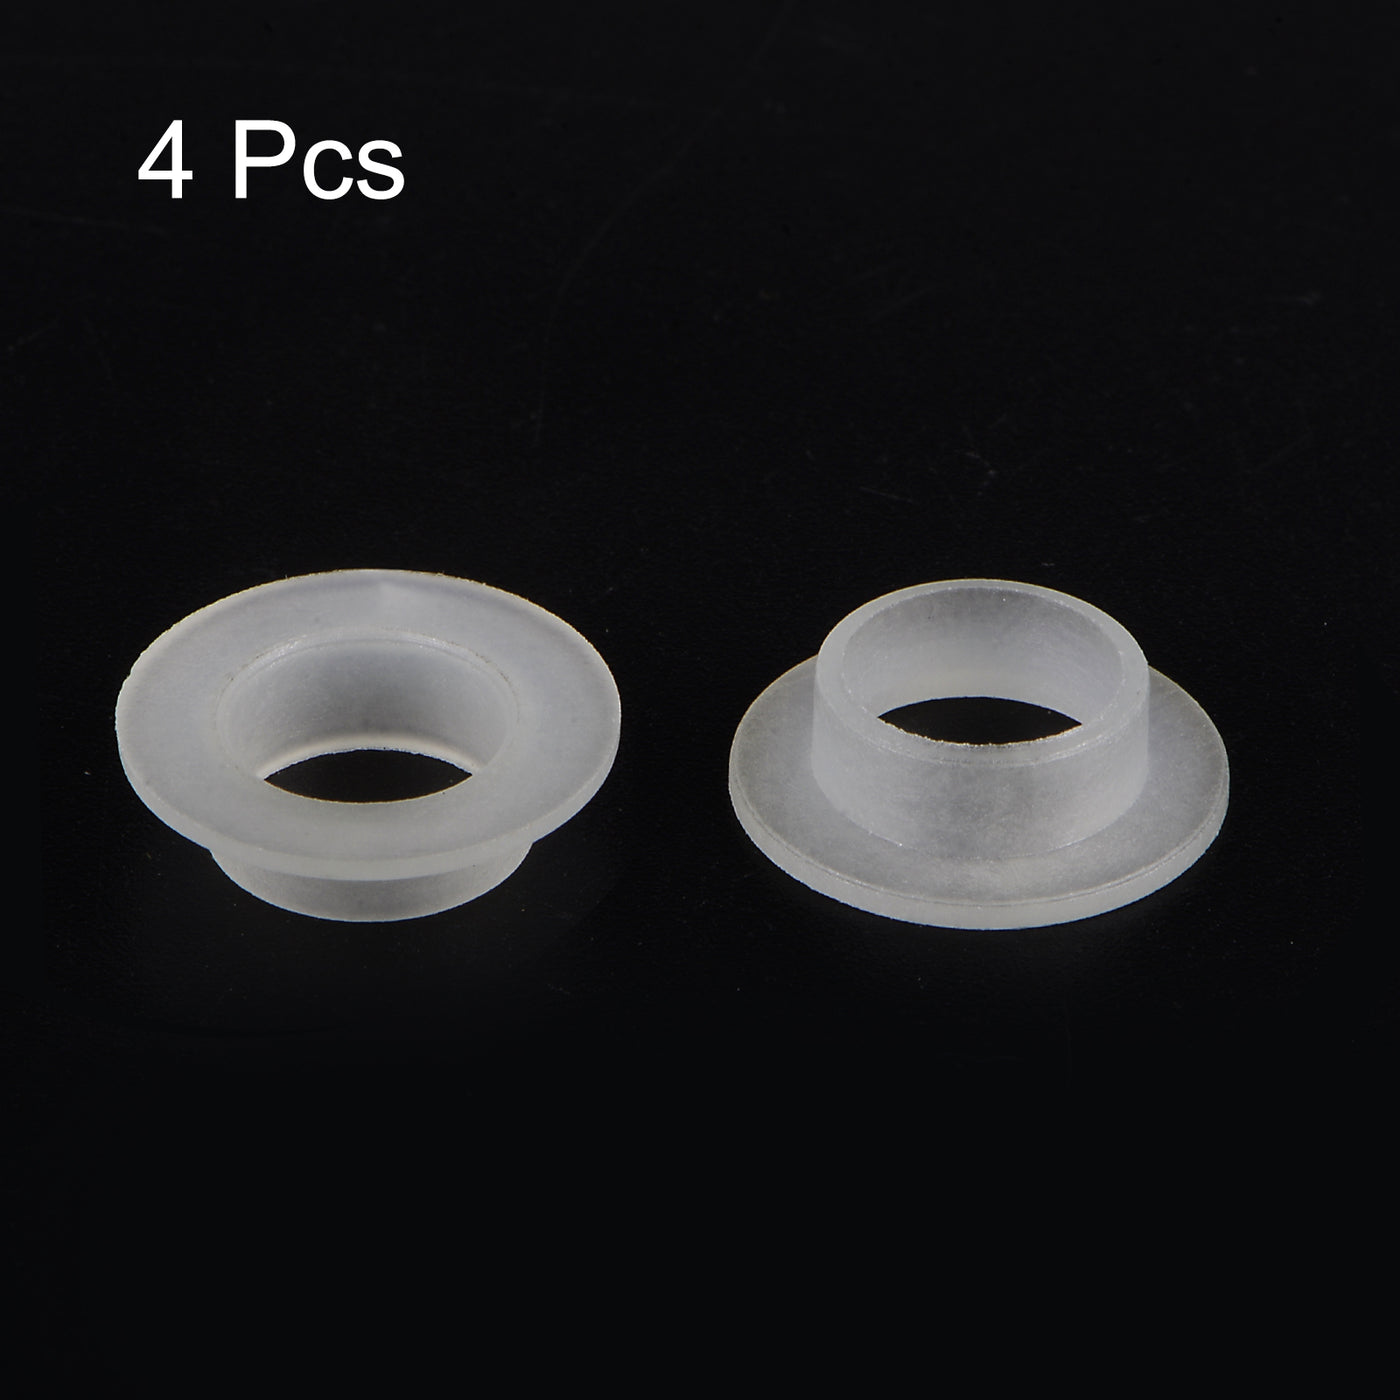 uxcell Uxcell 4pcs Flanged Sleeve Bearings 10mm ID 12.05mm OD 5mm Length Nylon Bushings, White